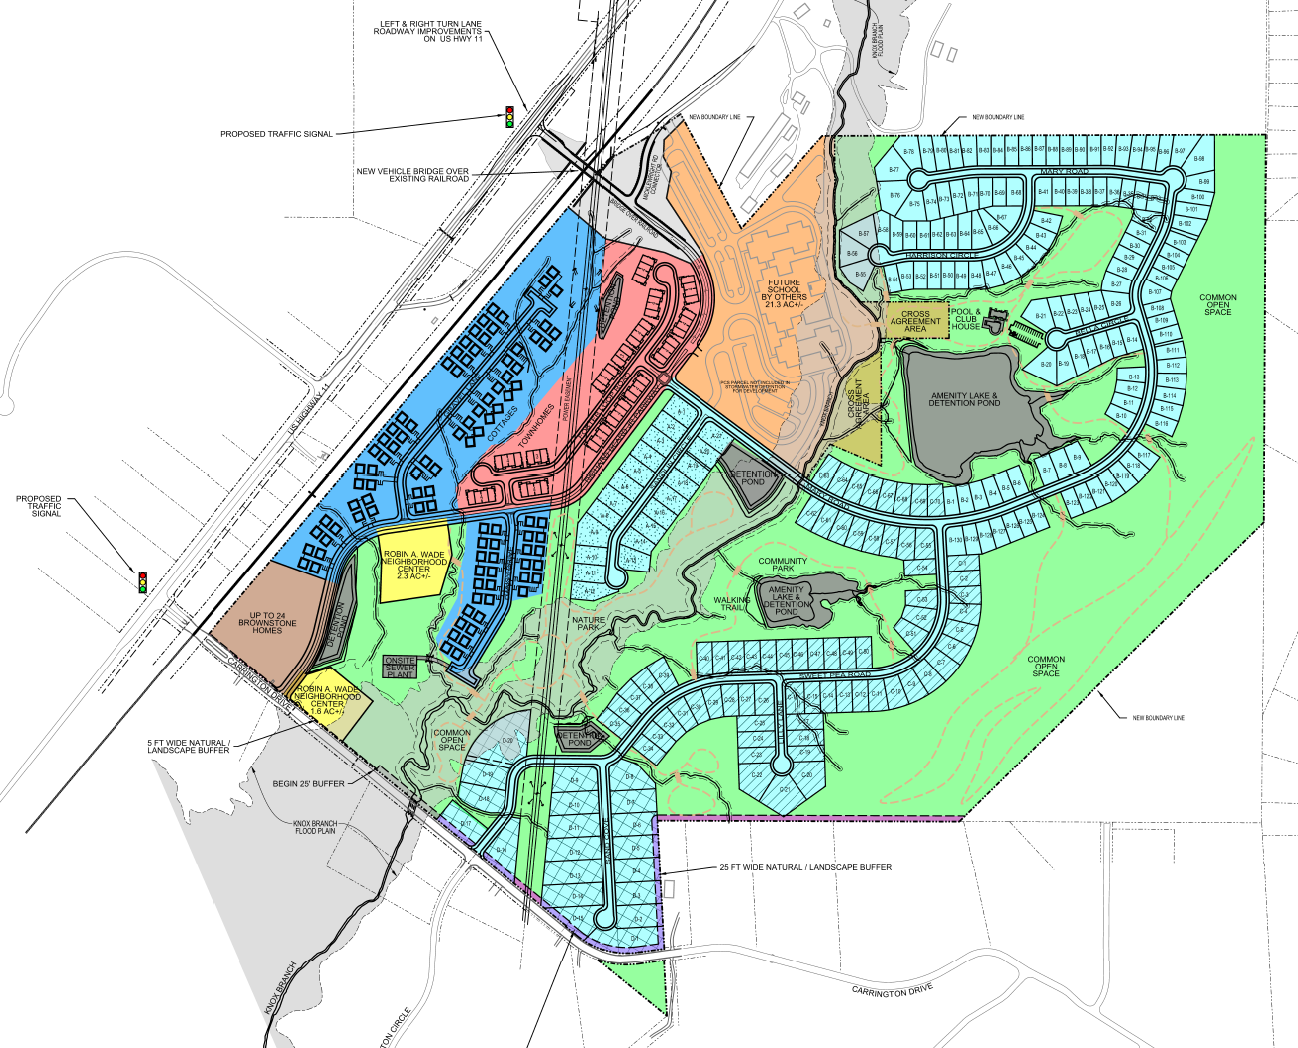 Residents voice concerns about Glendale Farms at Carrington, Planning and Zoning votes 'no'